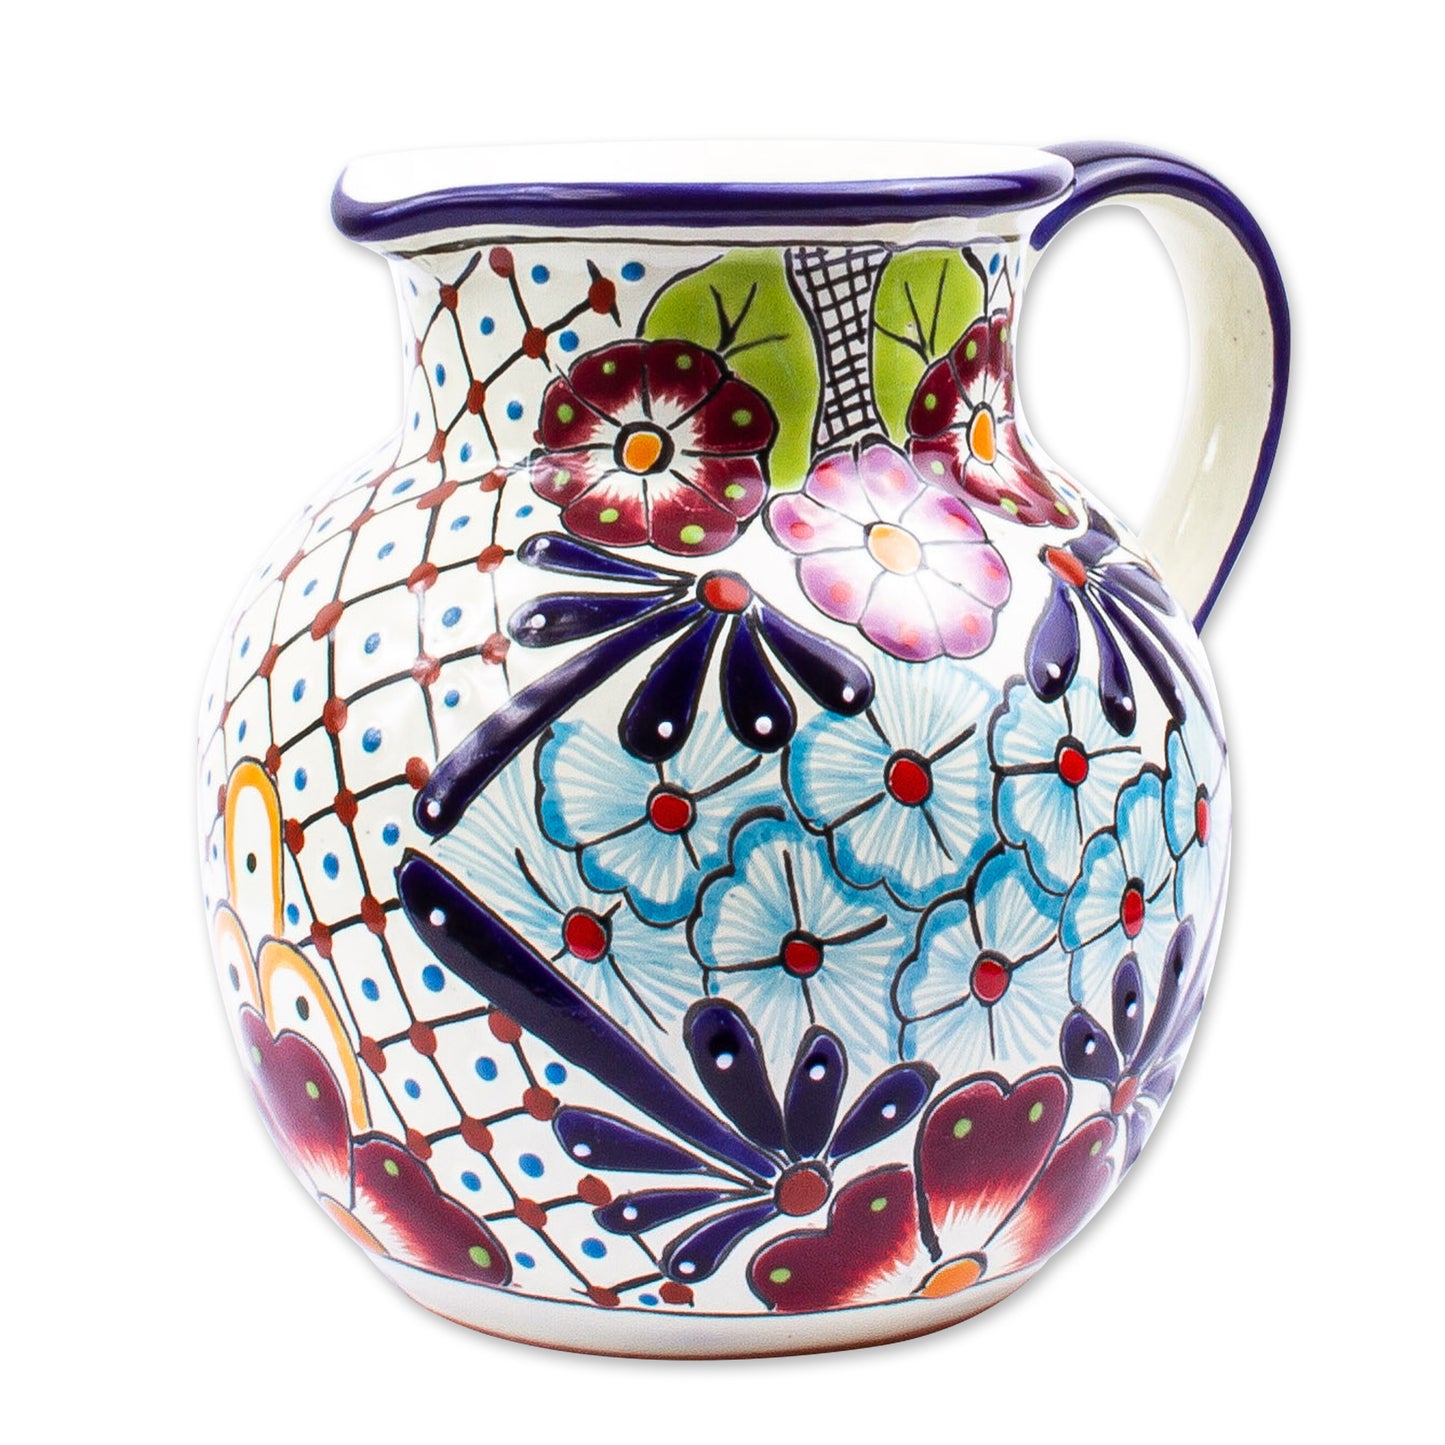 Colors of Mexico Colorful Talavera-style Ceramic Pitcher